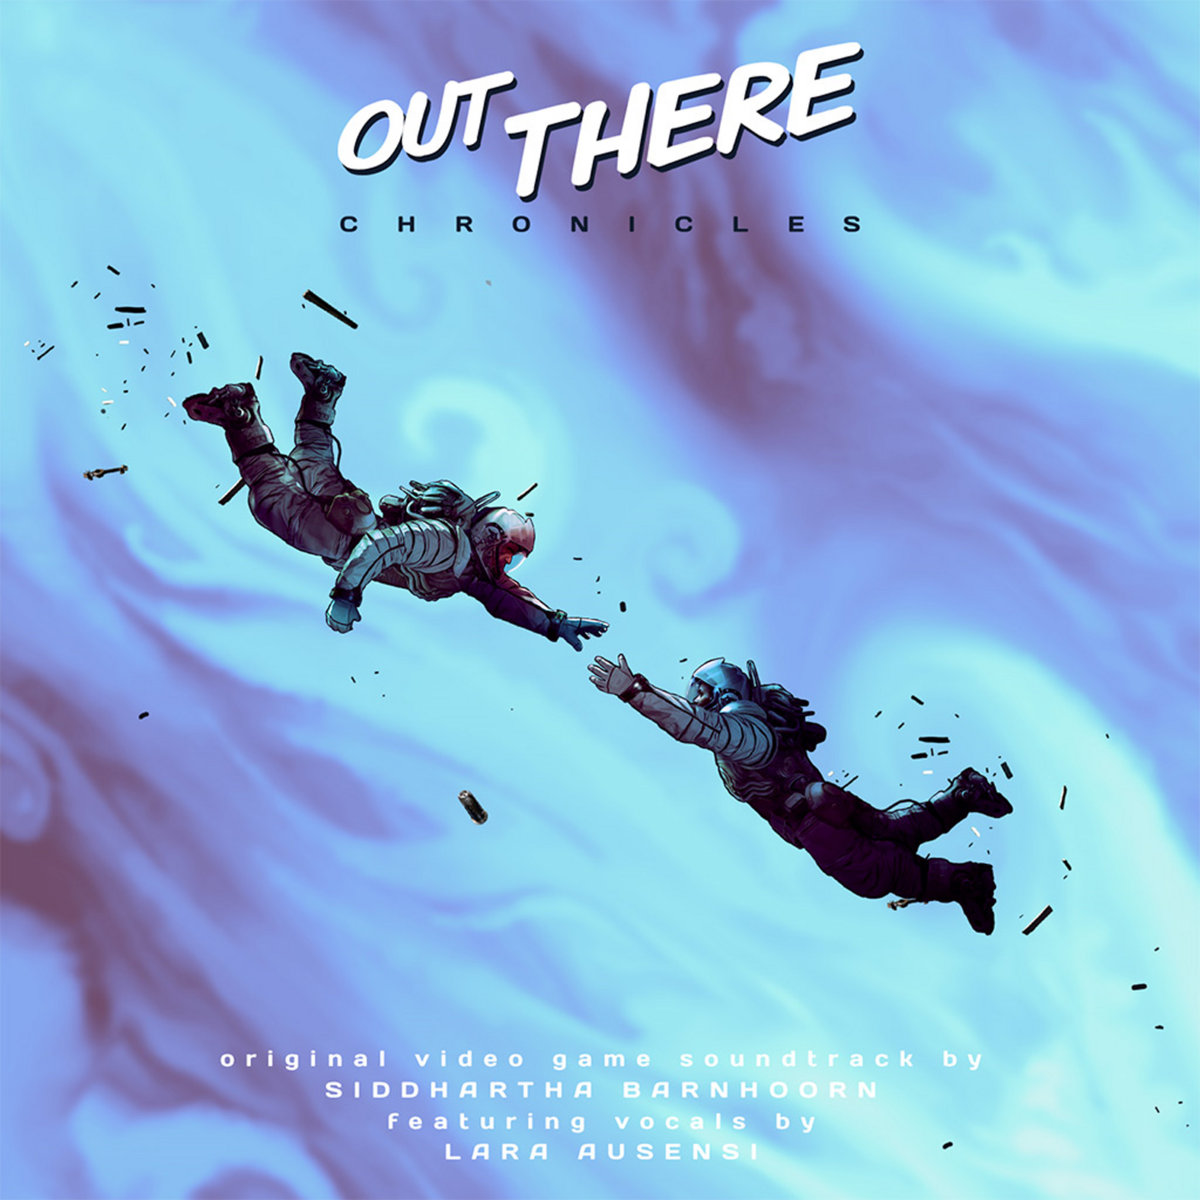 Out There Chronicles by Sid Barnhoorn and Lara Ausensi thumbnail